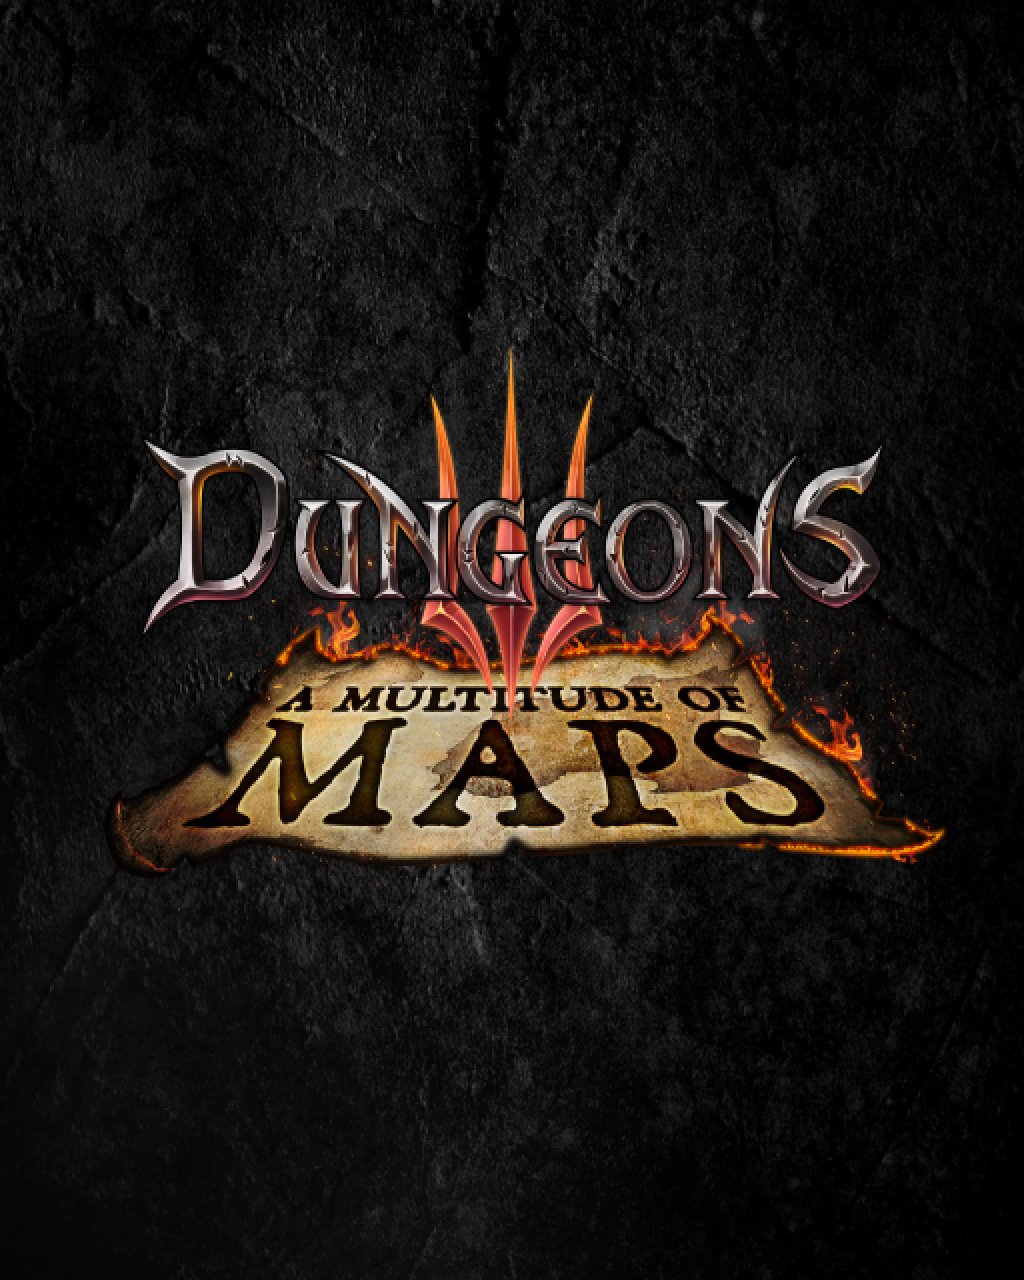 Dungeons 3 A Multitude of Maps